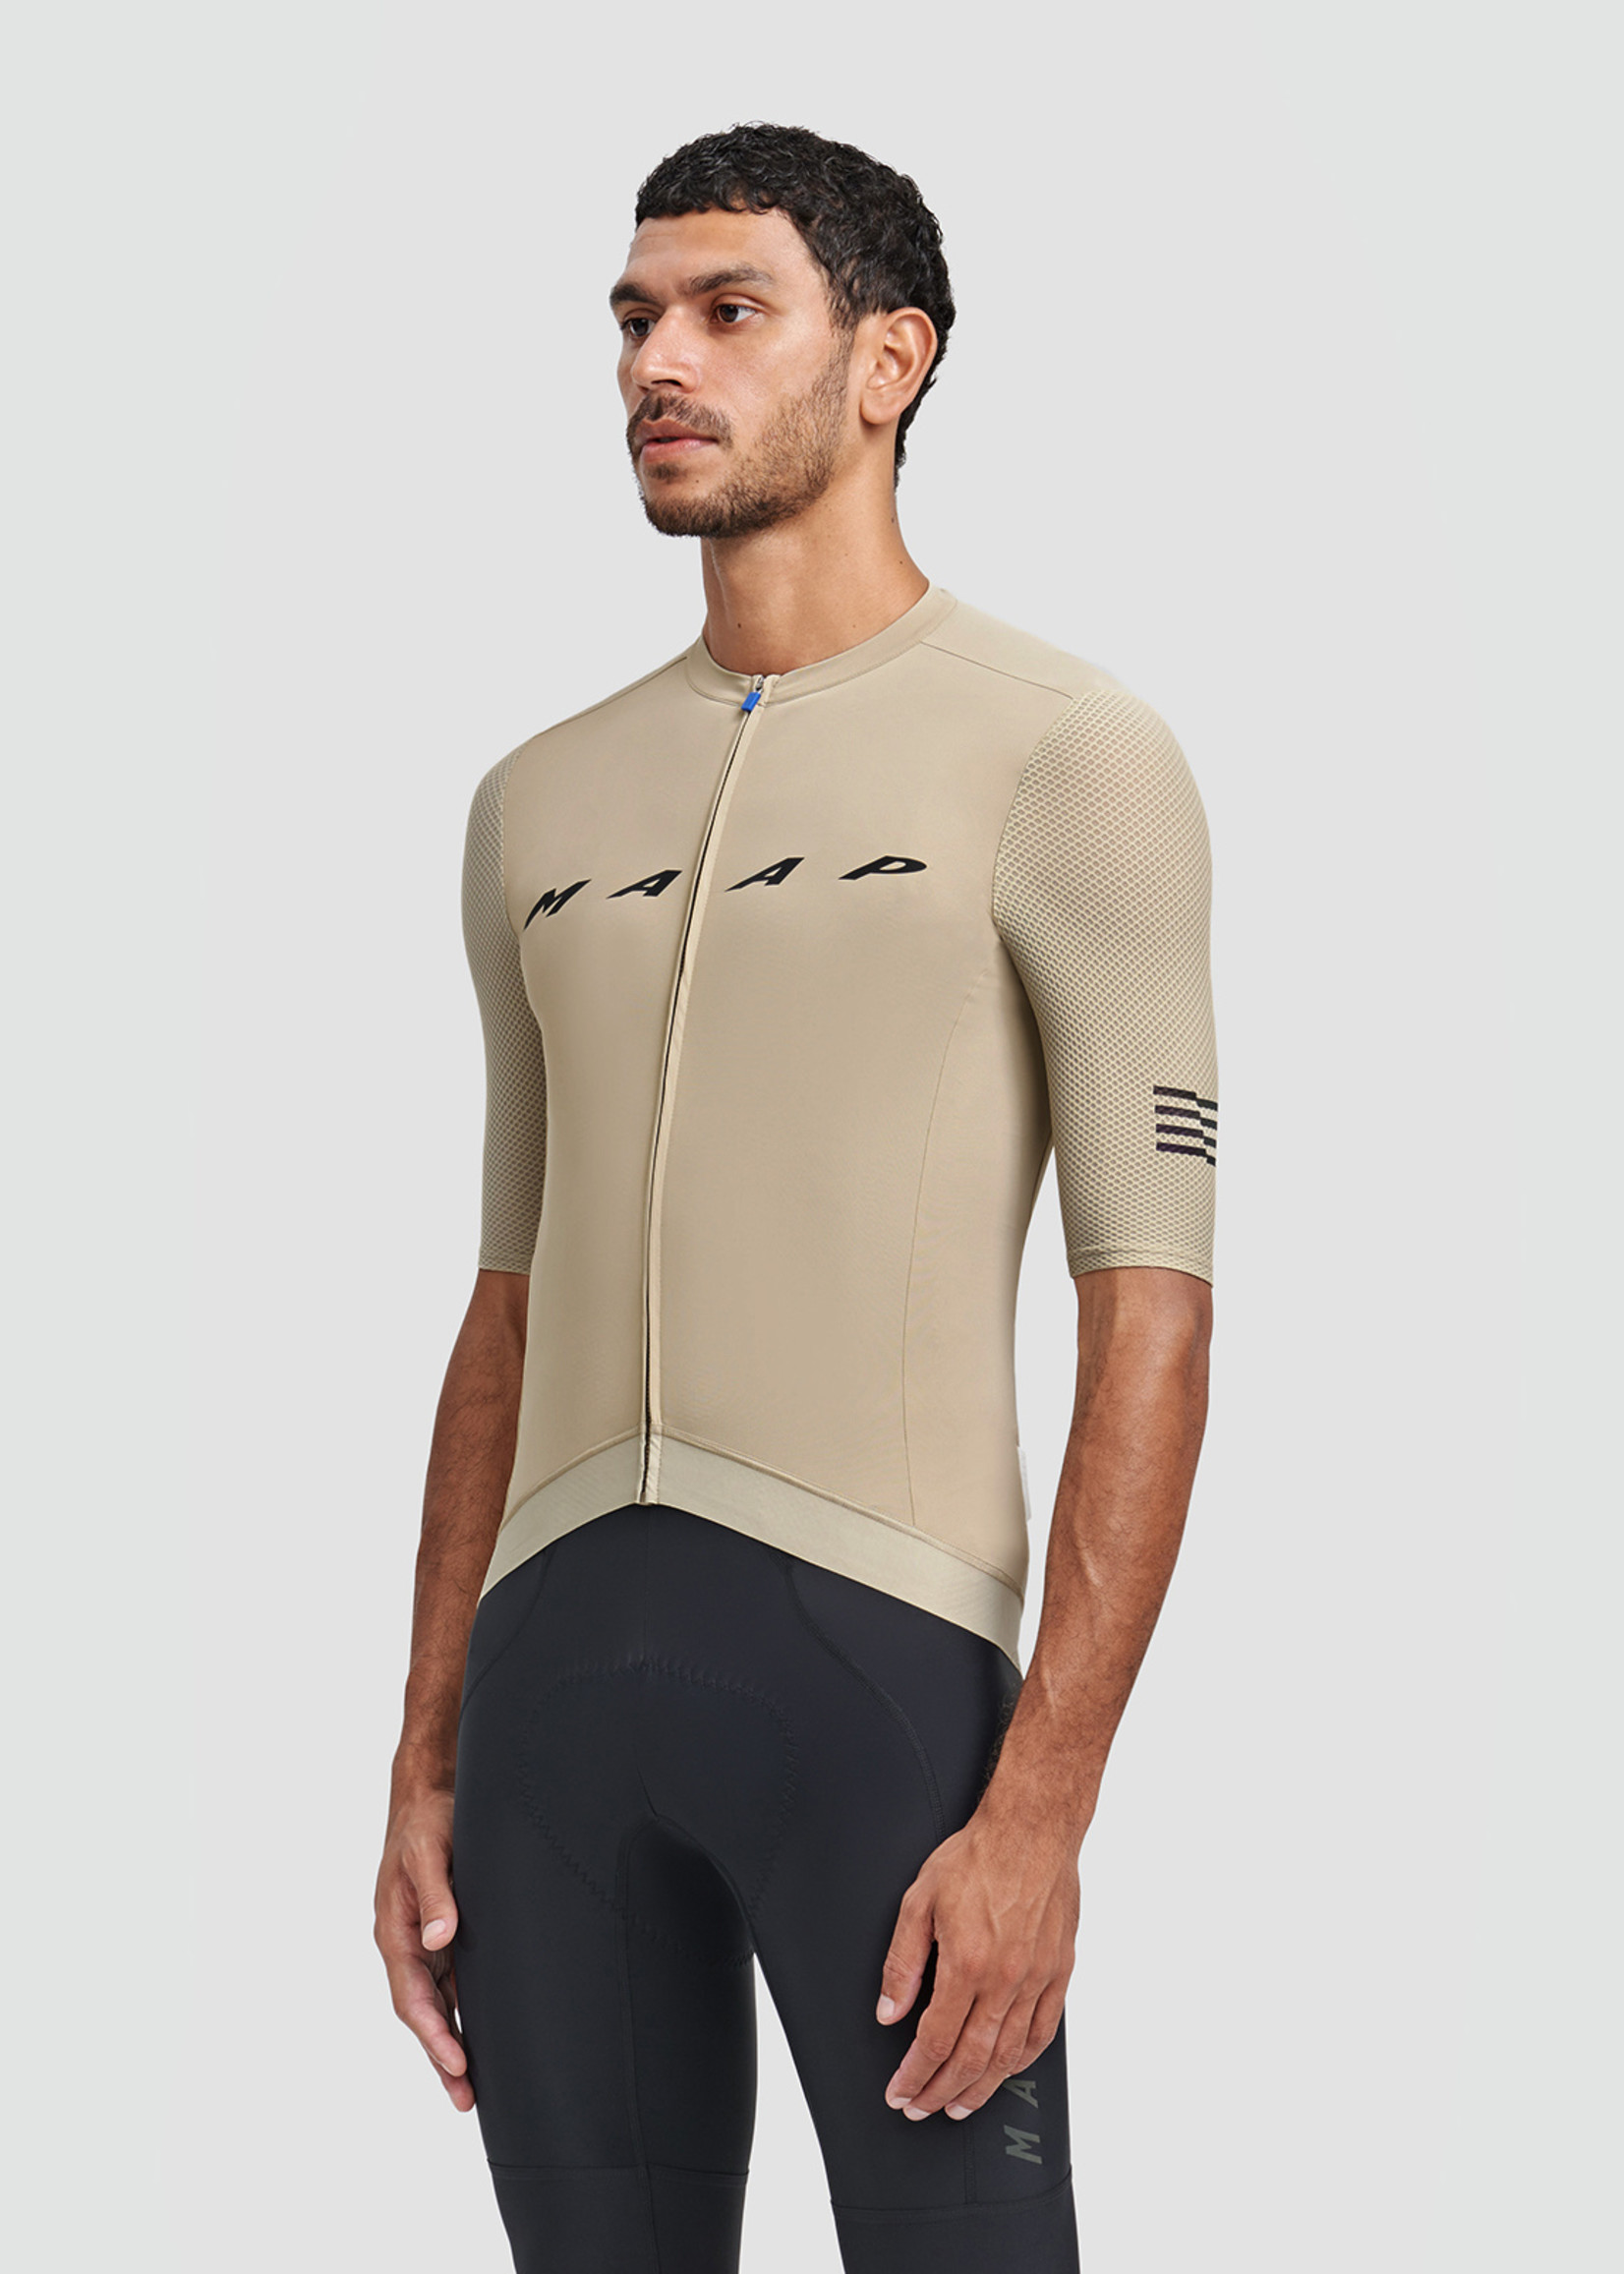 MAAP - Evade Pro Base Jersey - Taupe - Bataia